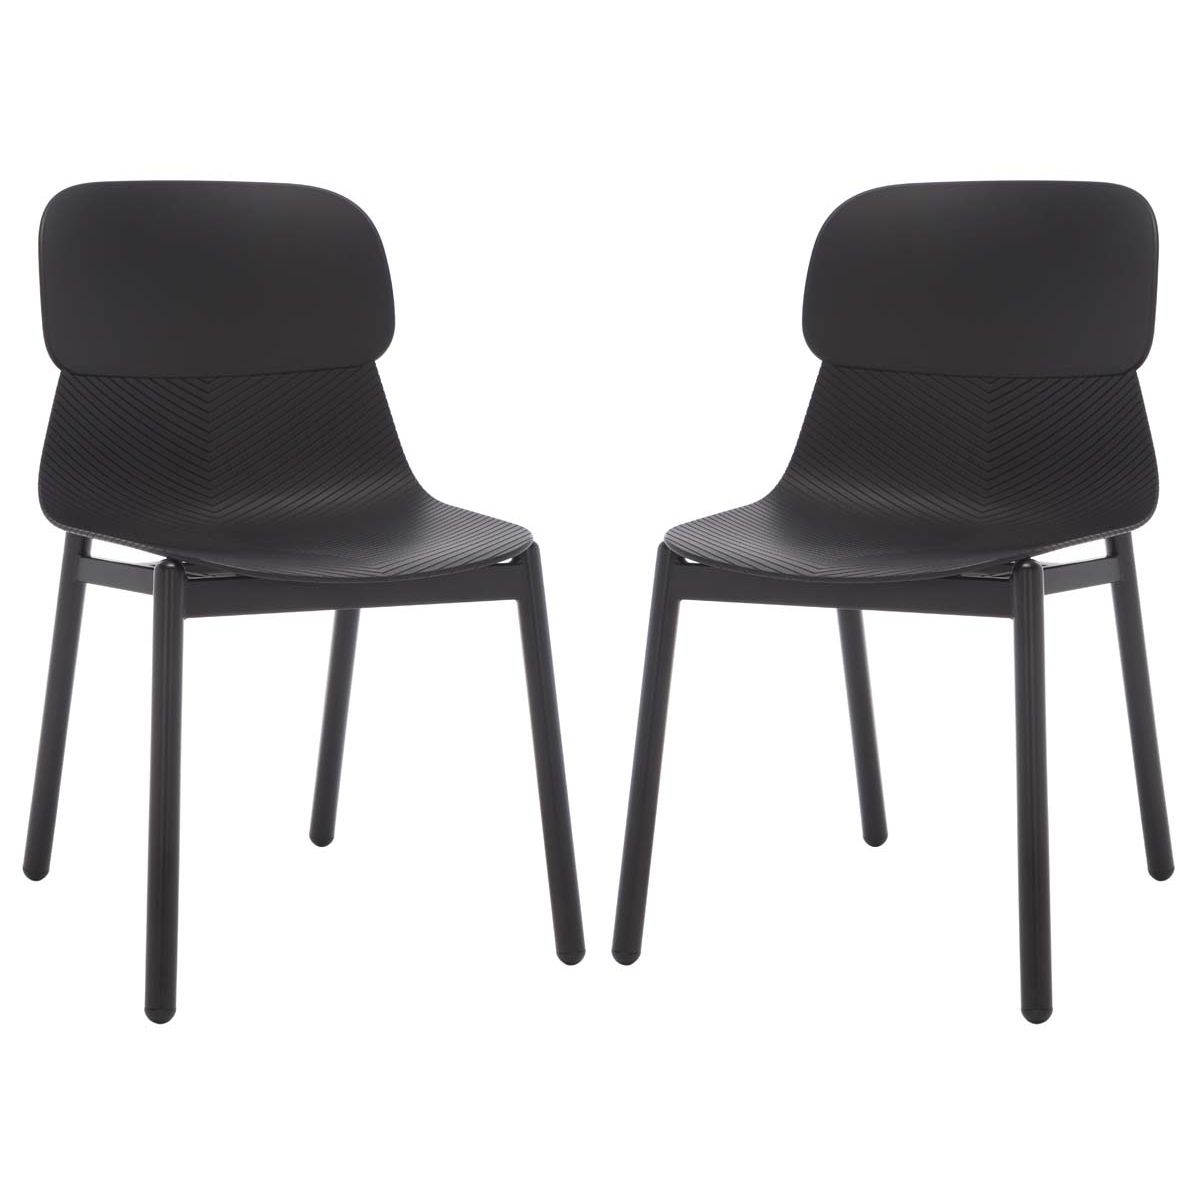 Safavieh Couture Abbie Dining Chairs (Set of 2) - Black